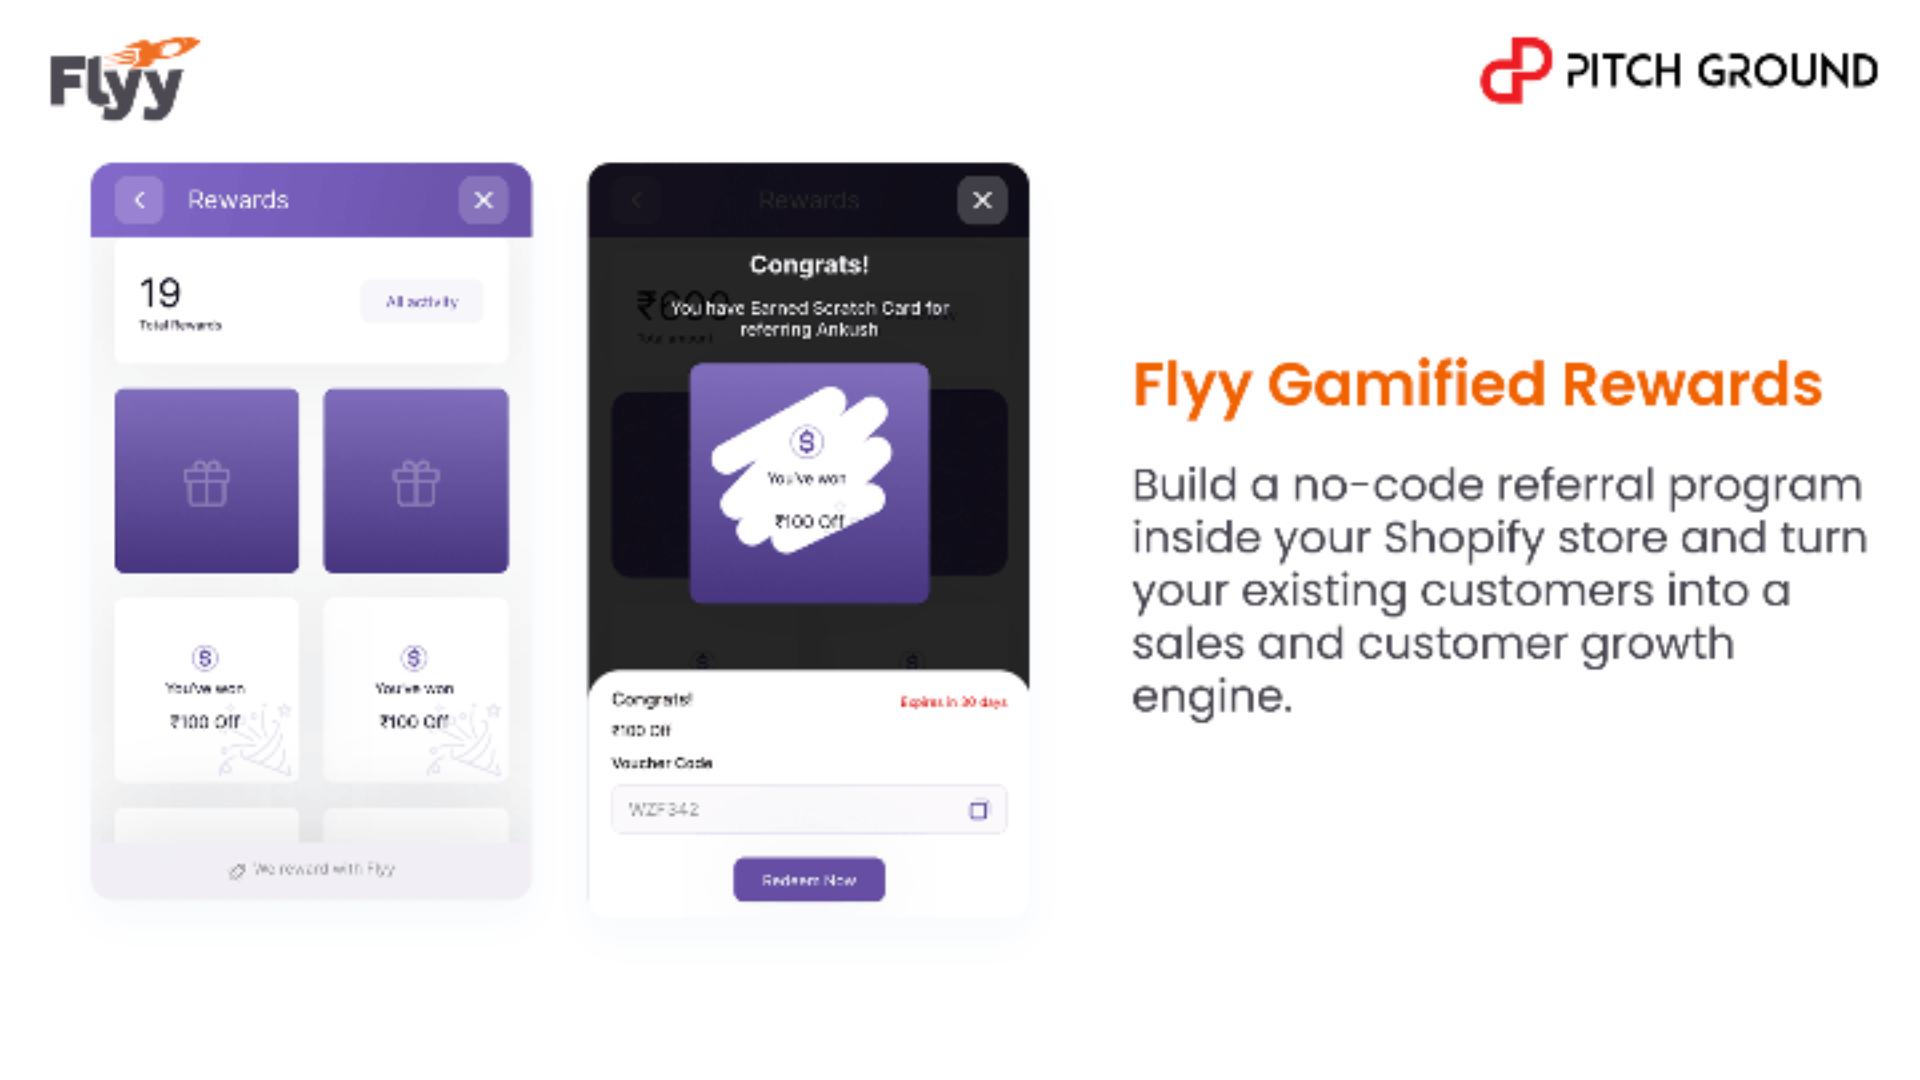 Lifetime Deal to Flyy Gamified Rewards: Acquire Growth for $64